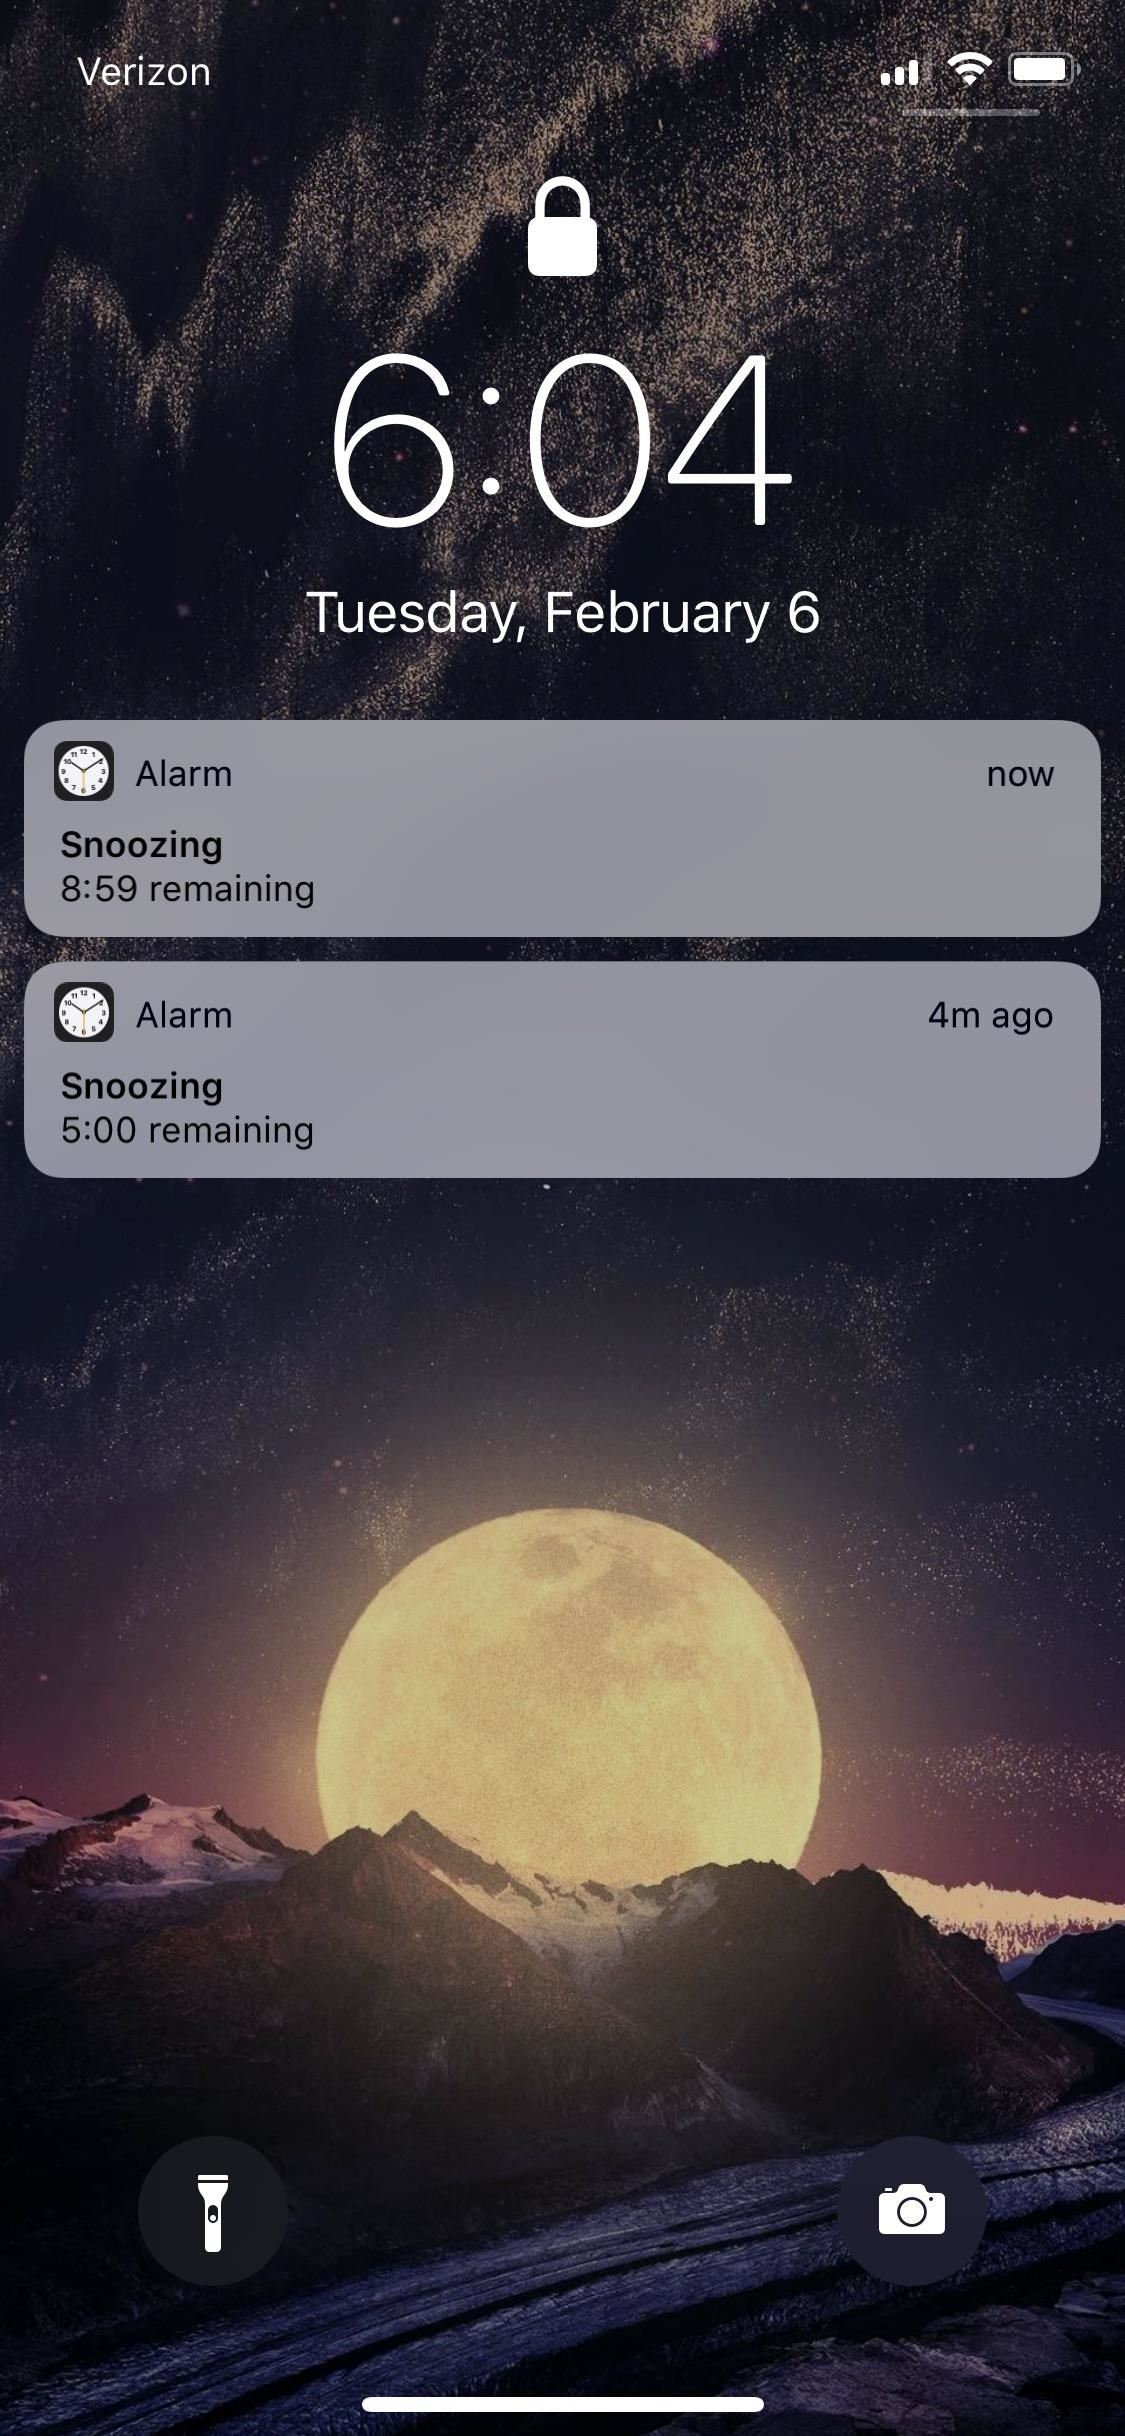 How to Change the Default Snooze Time on Your iPhone